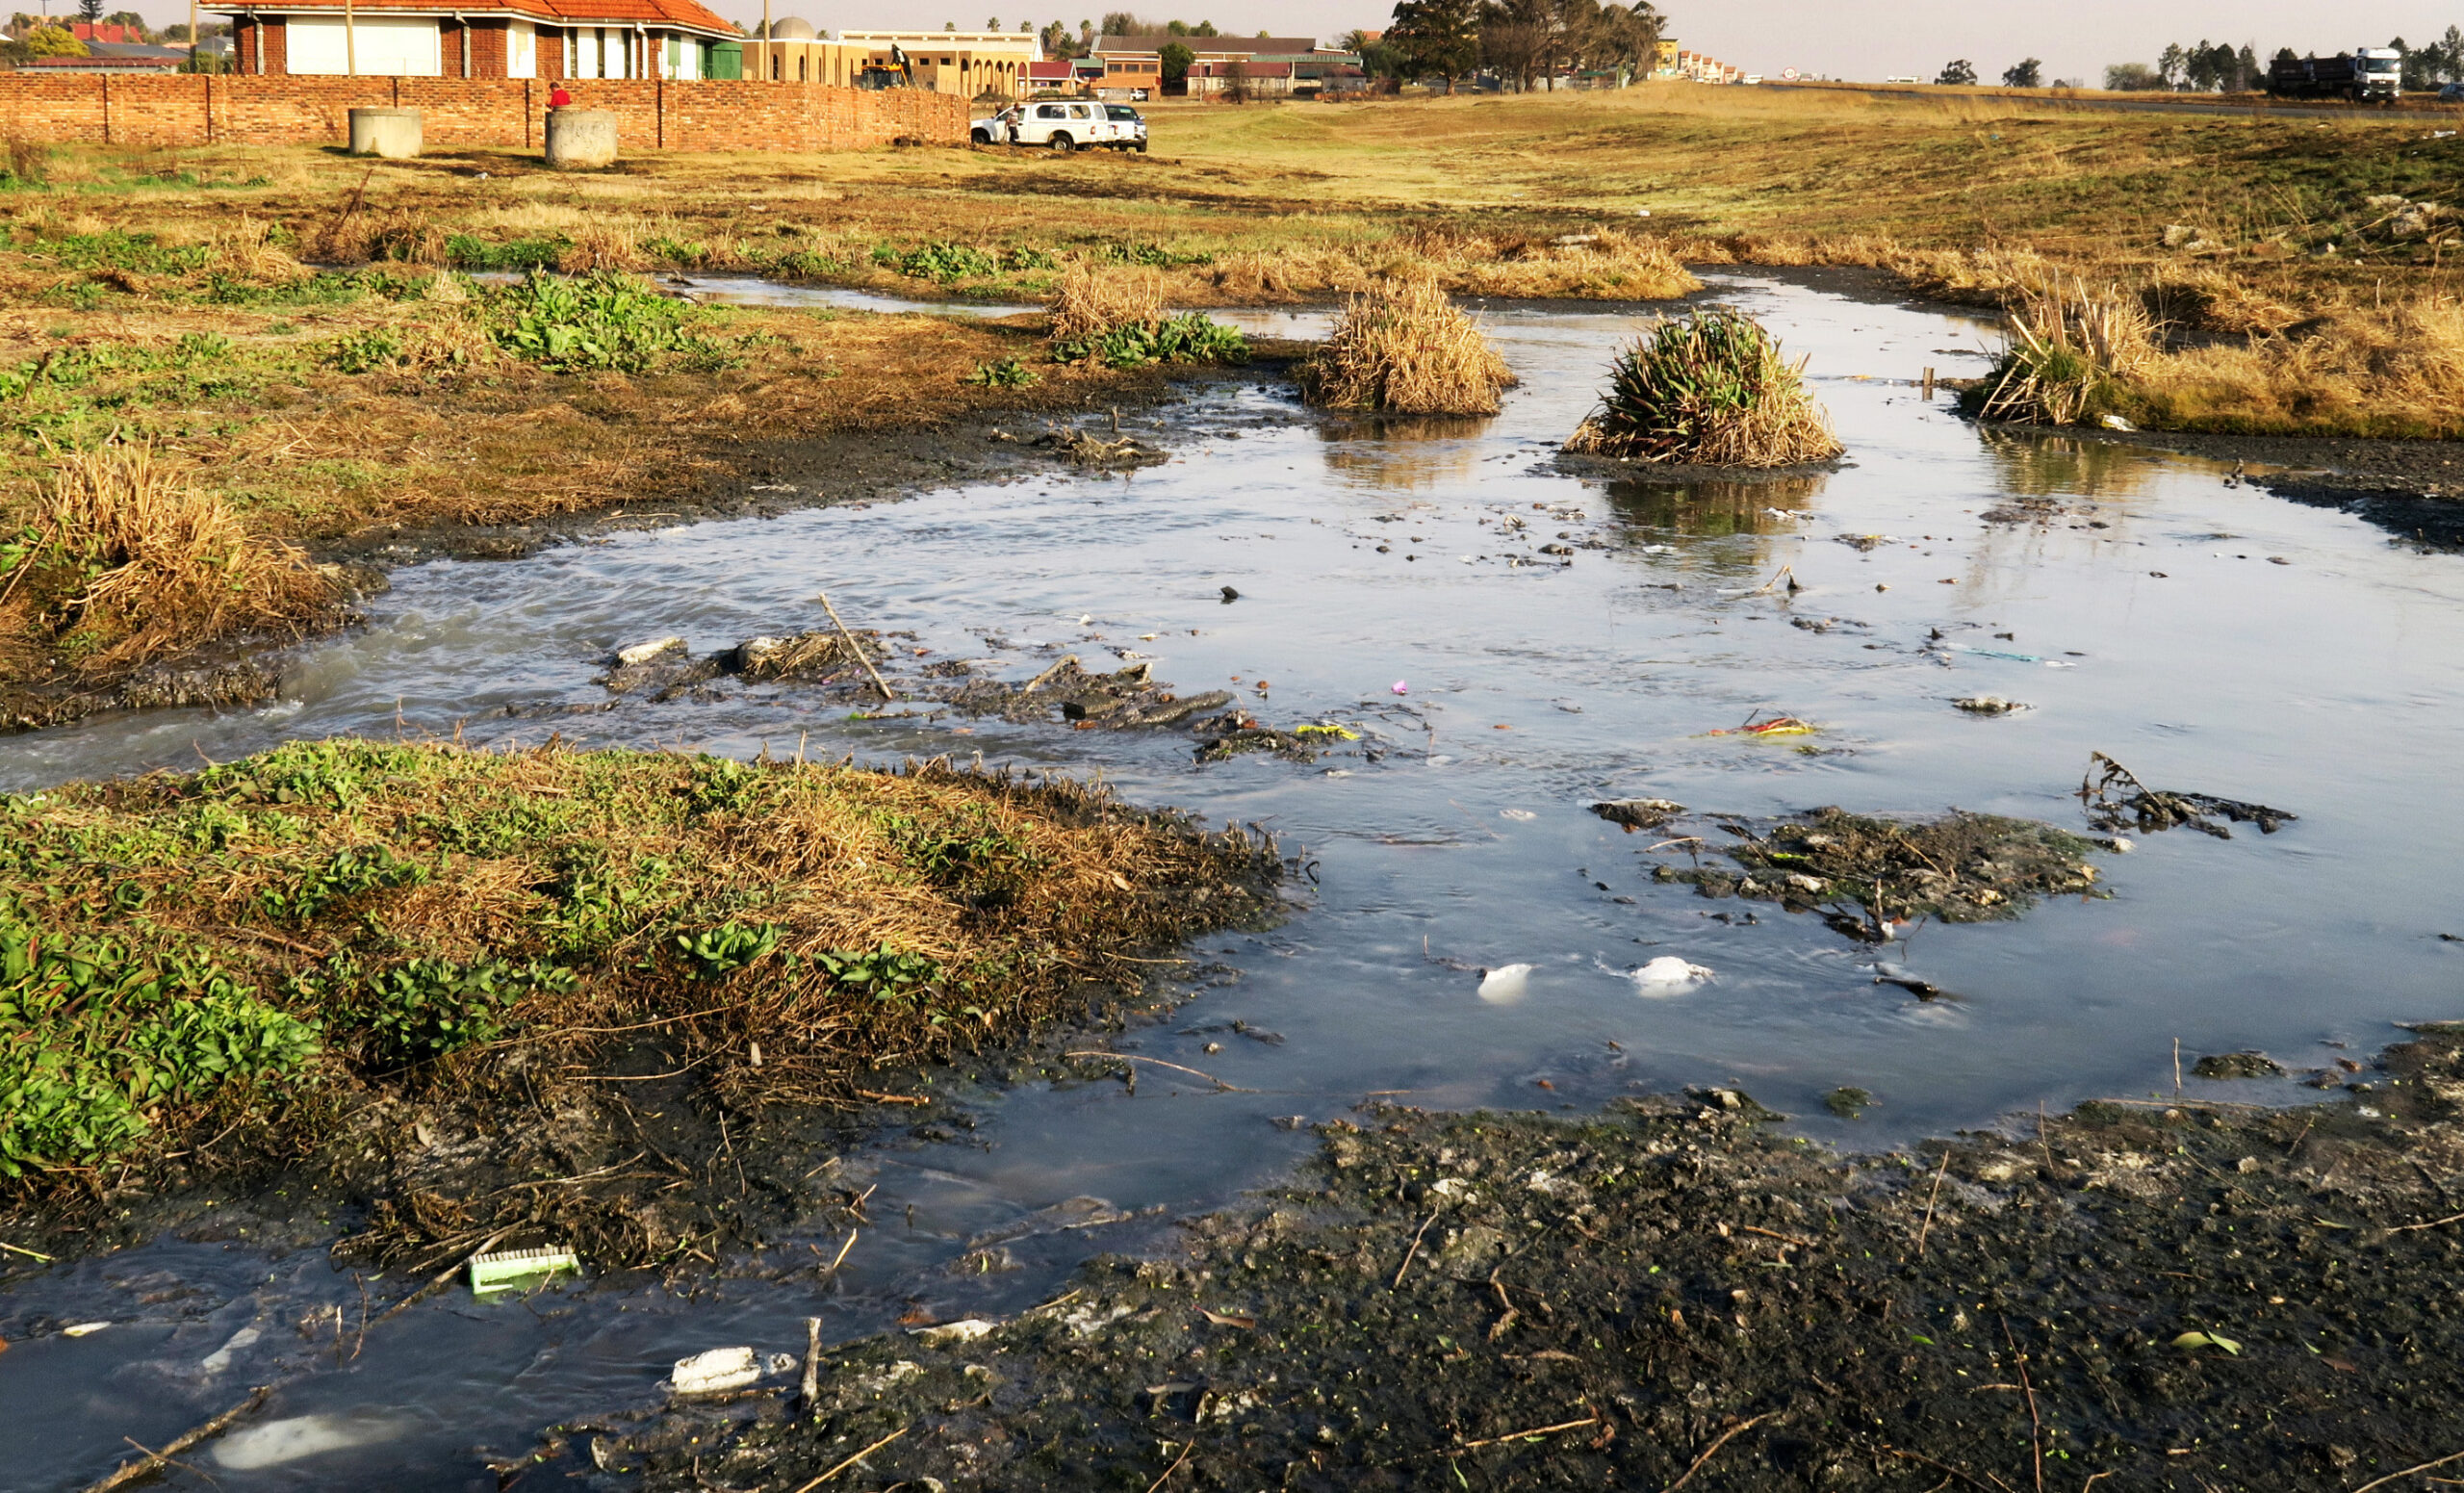 South Africa’s rivers of sewage